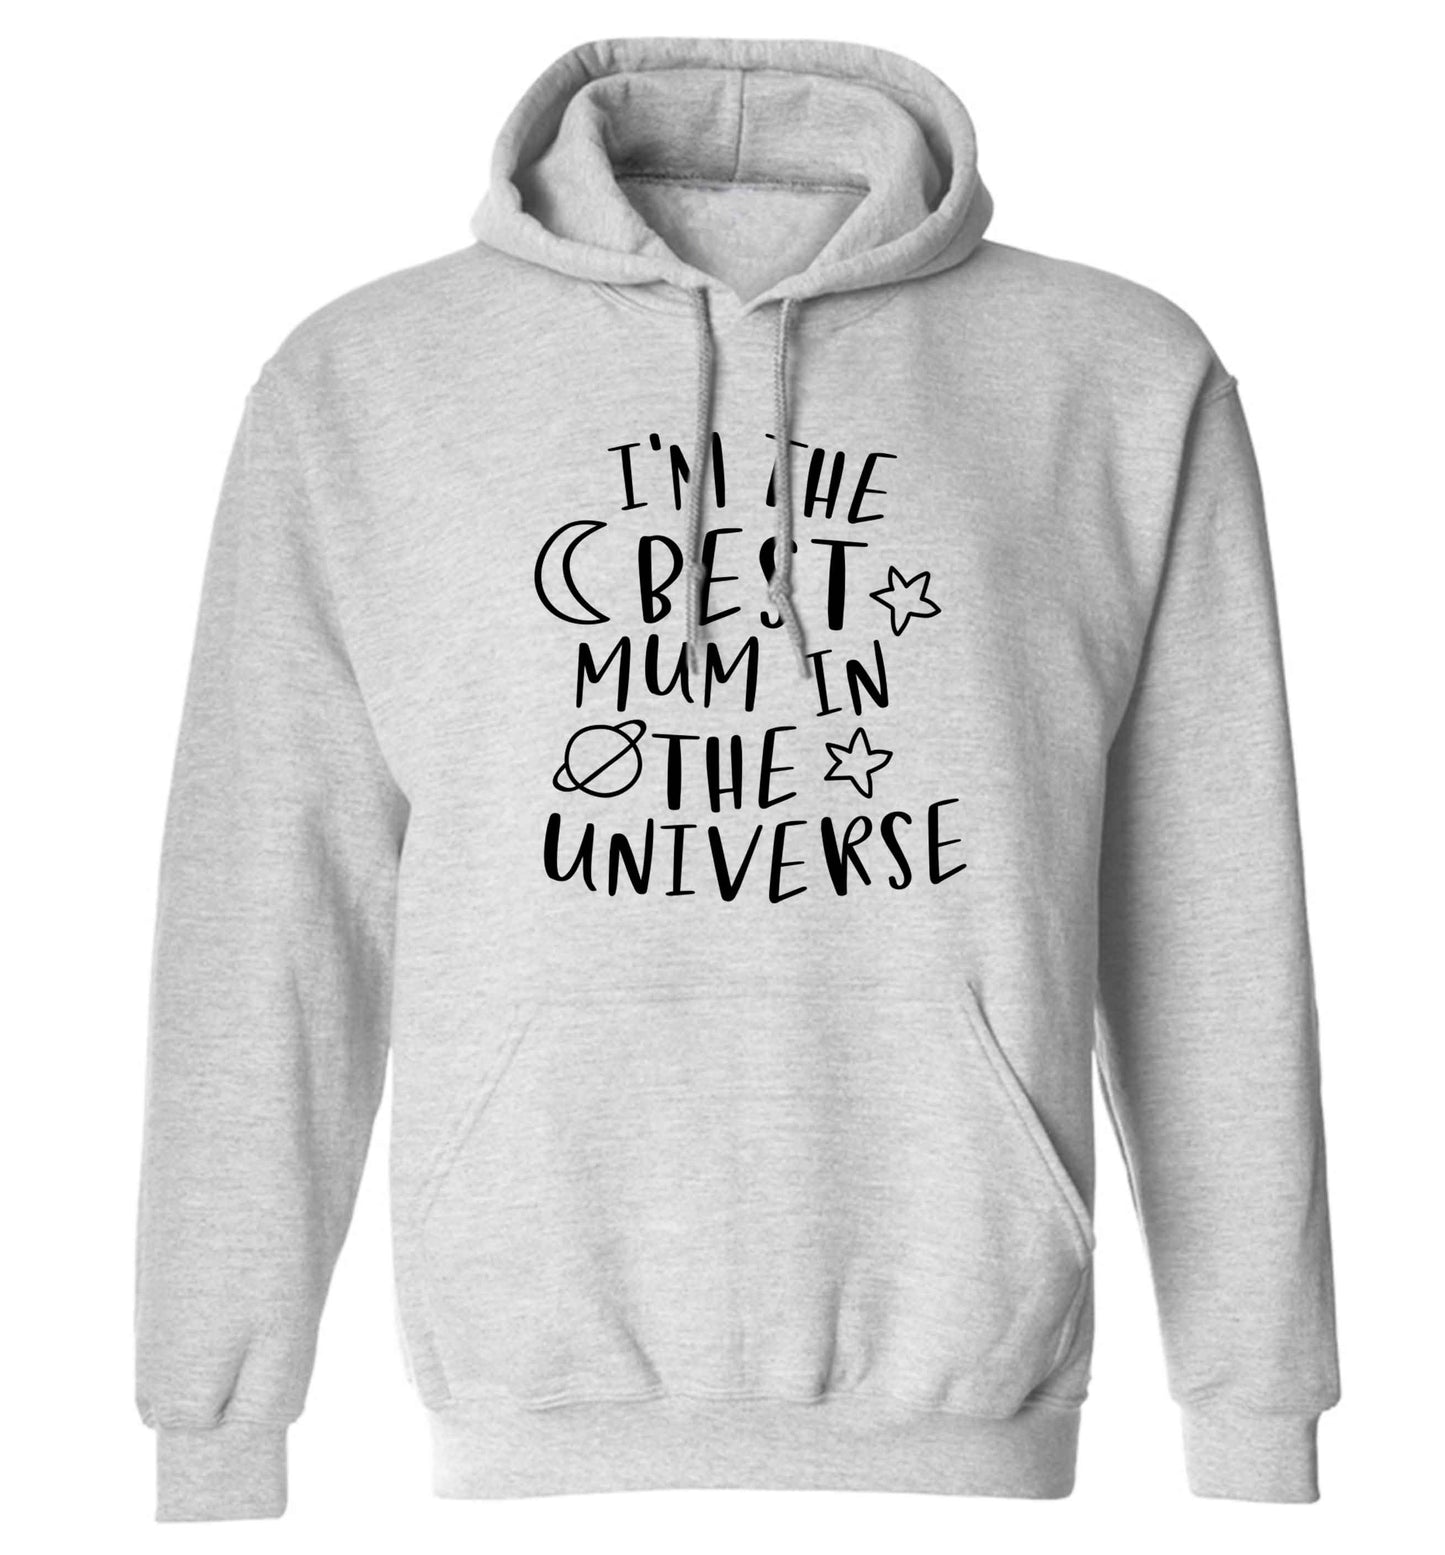 I'm the best mum in the universe adults unisex grey hoodie 2XL